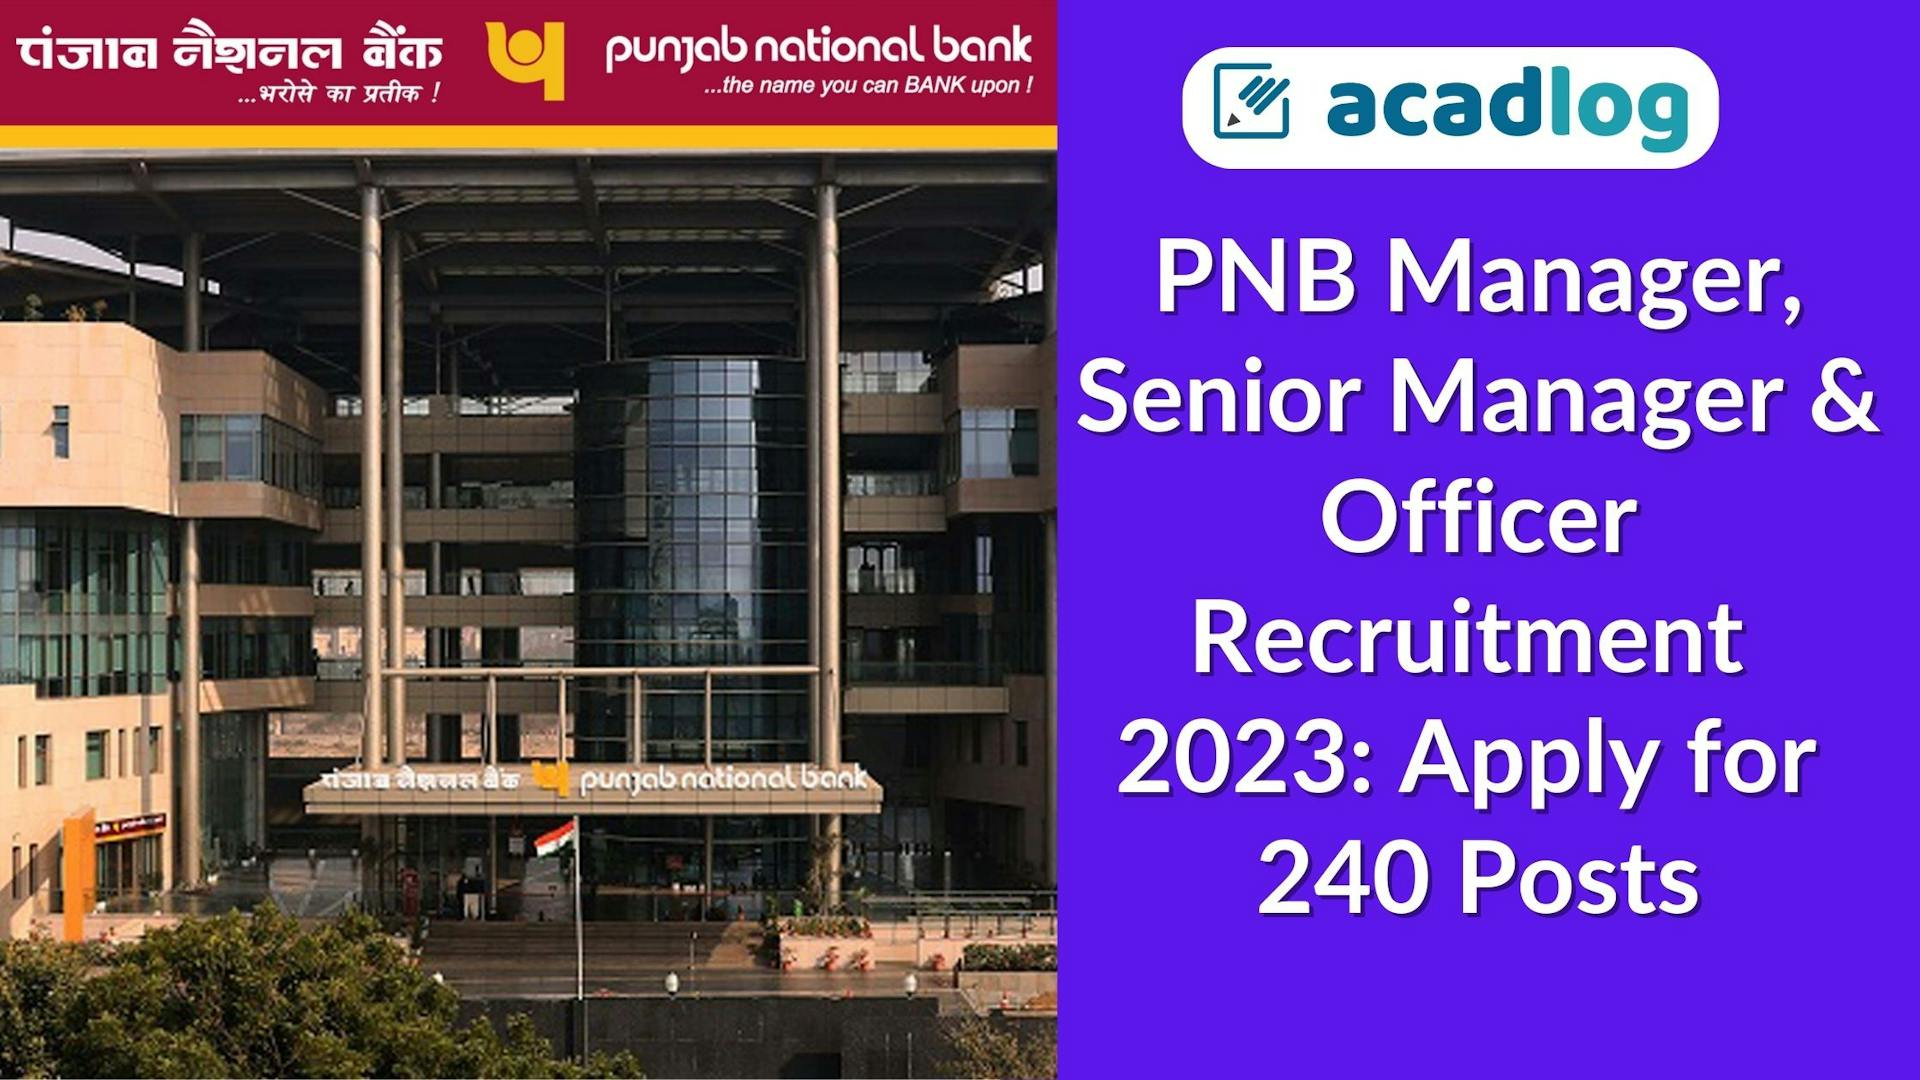 PNB Manager & Officer Recruitment 2023: Apply for 240 Posts